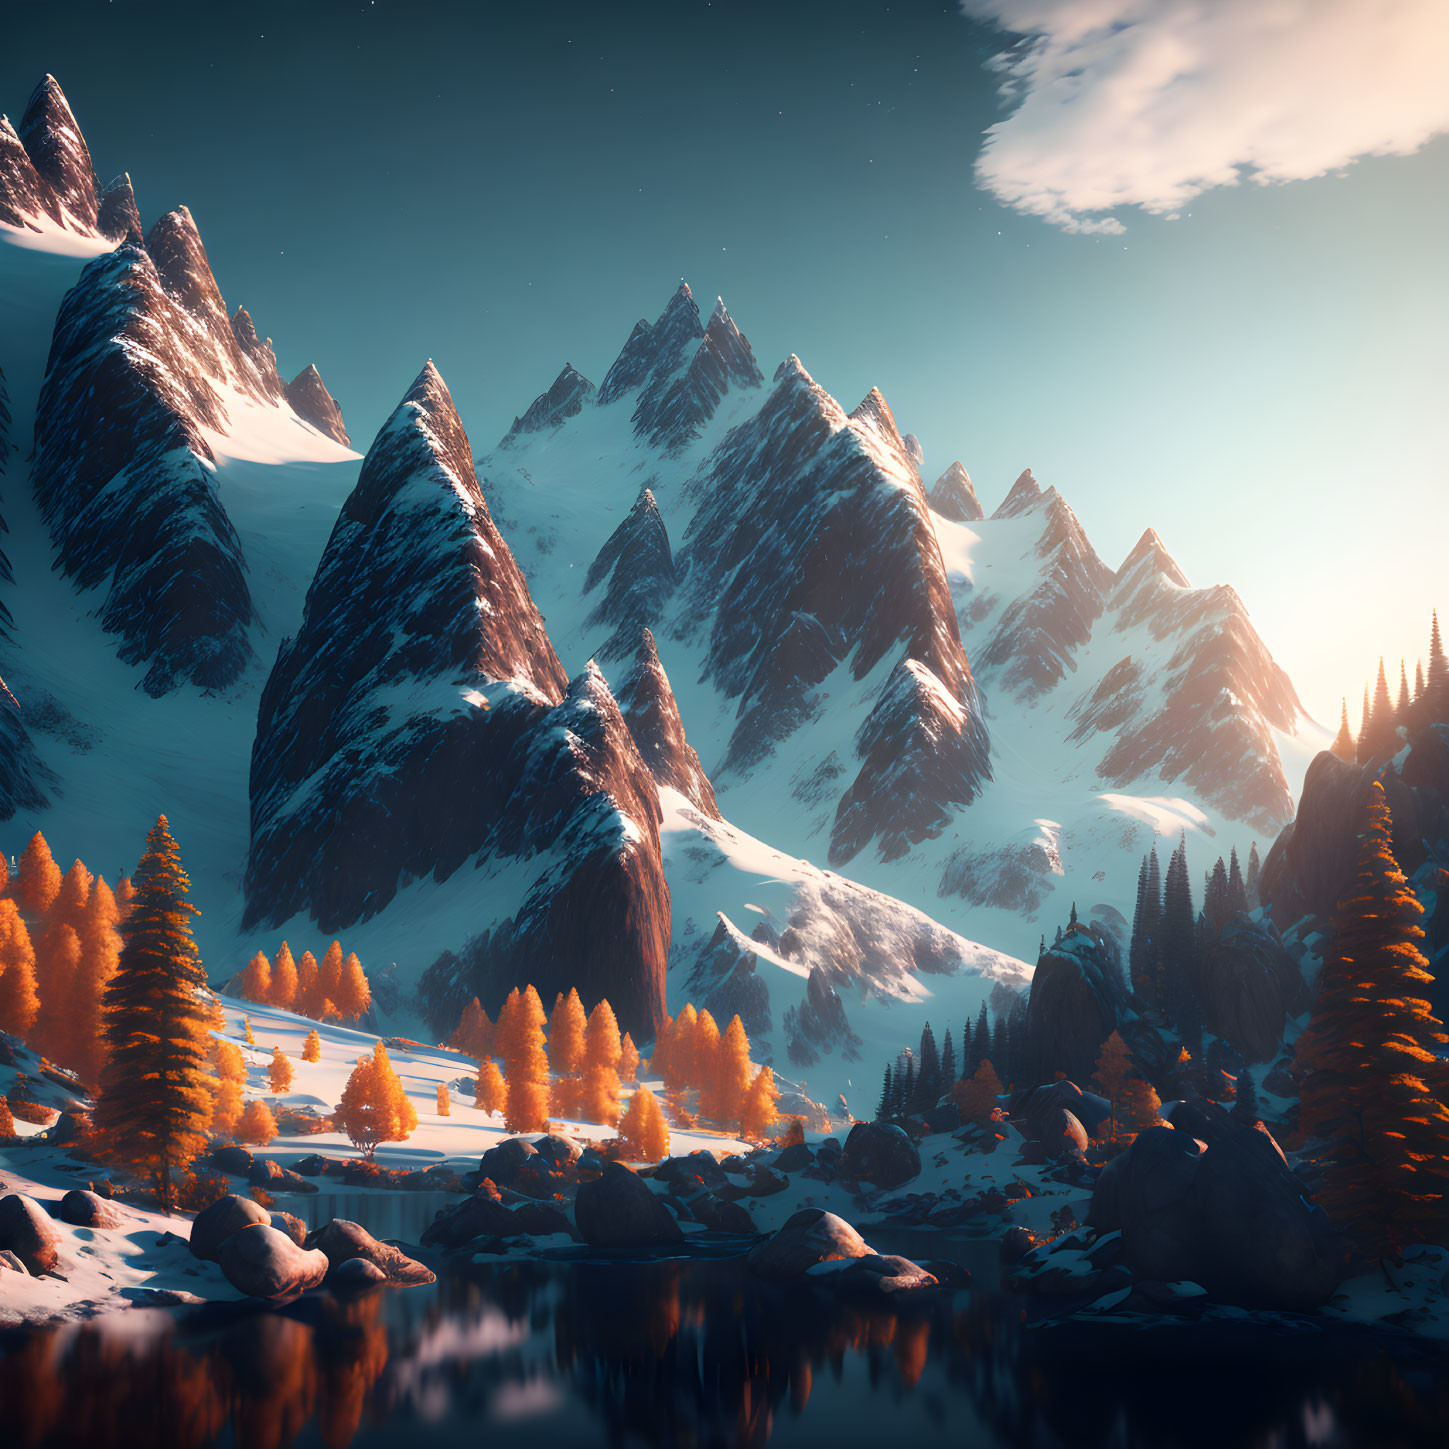 Majestic snow-capped mountains and autumn landscape at sunset